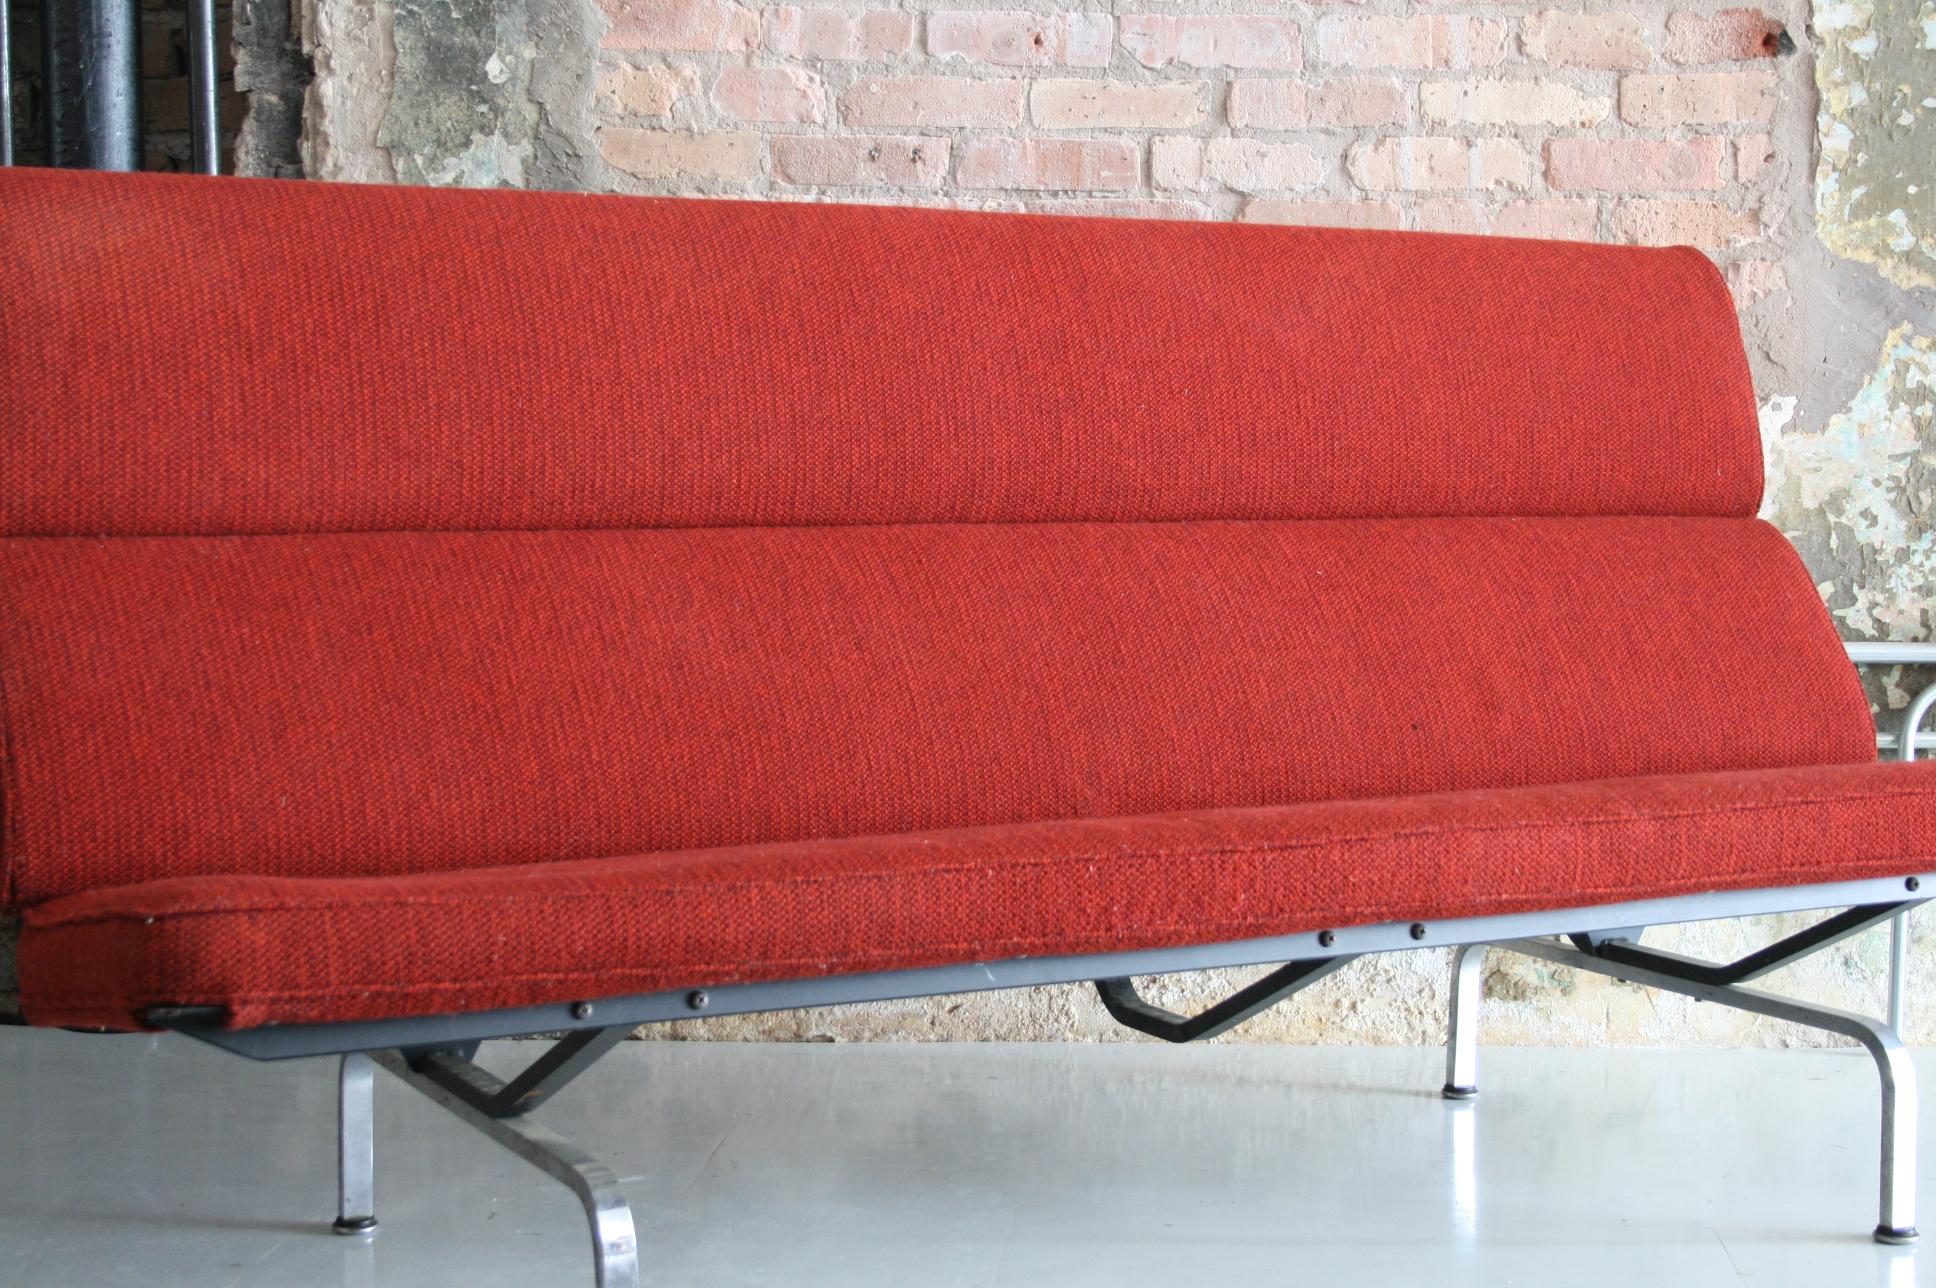 Enameled Sofa Compact by Ray and Charles Eames for Herman Miller